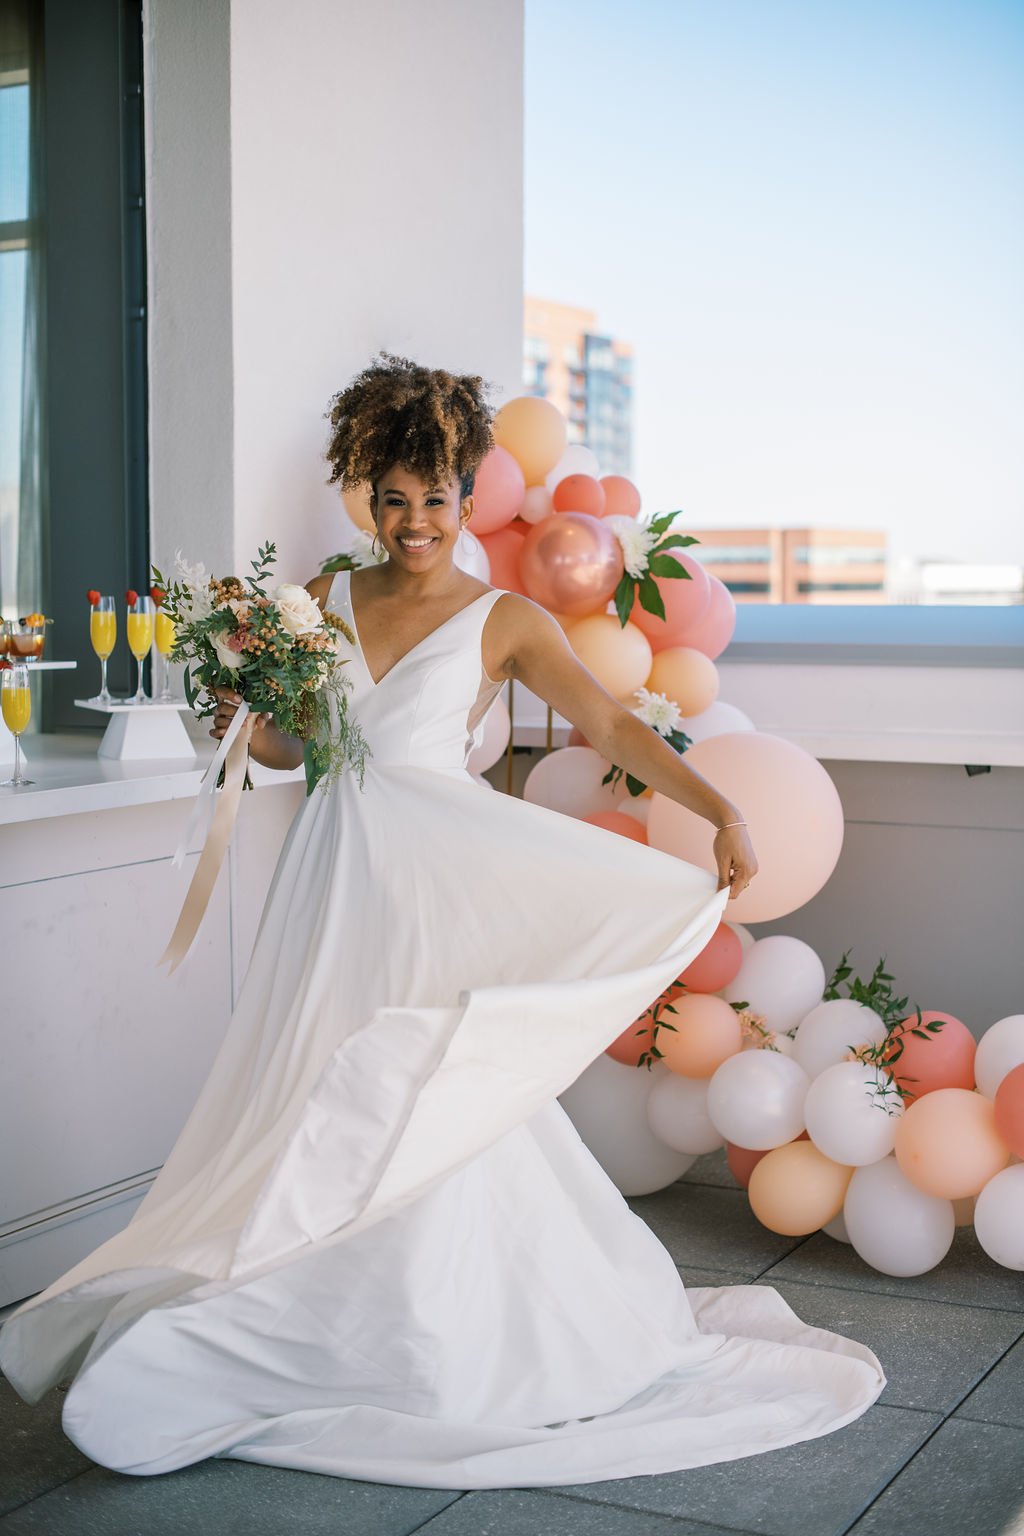 Bride Twirl Dress Balloon Garland The Willard Rooftop Lounge at AC Hotel Raleigh Downtown Fancy This Photography